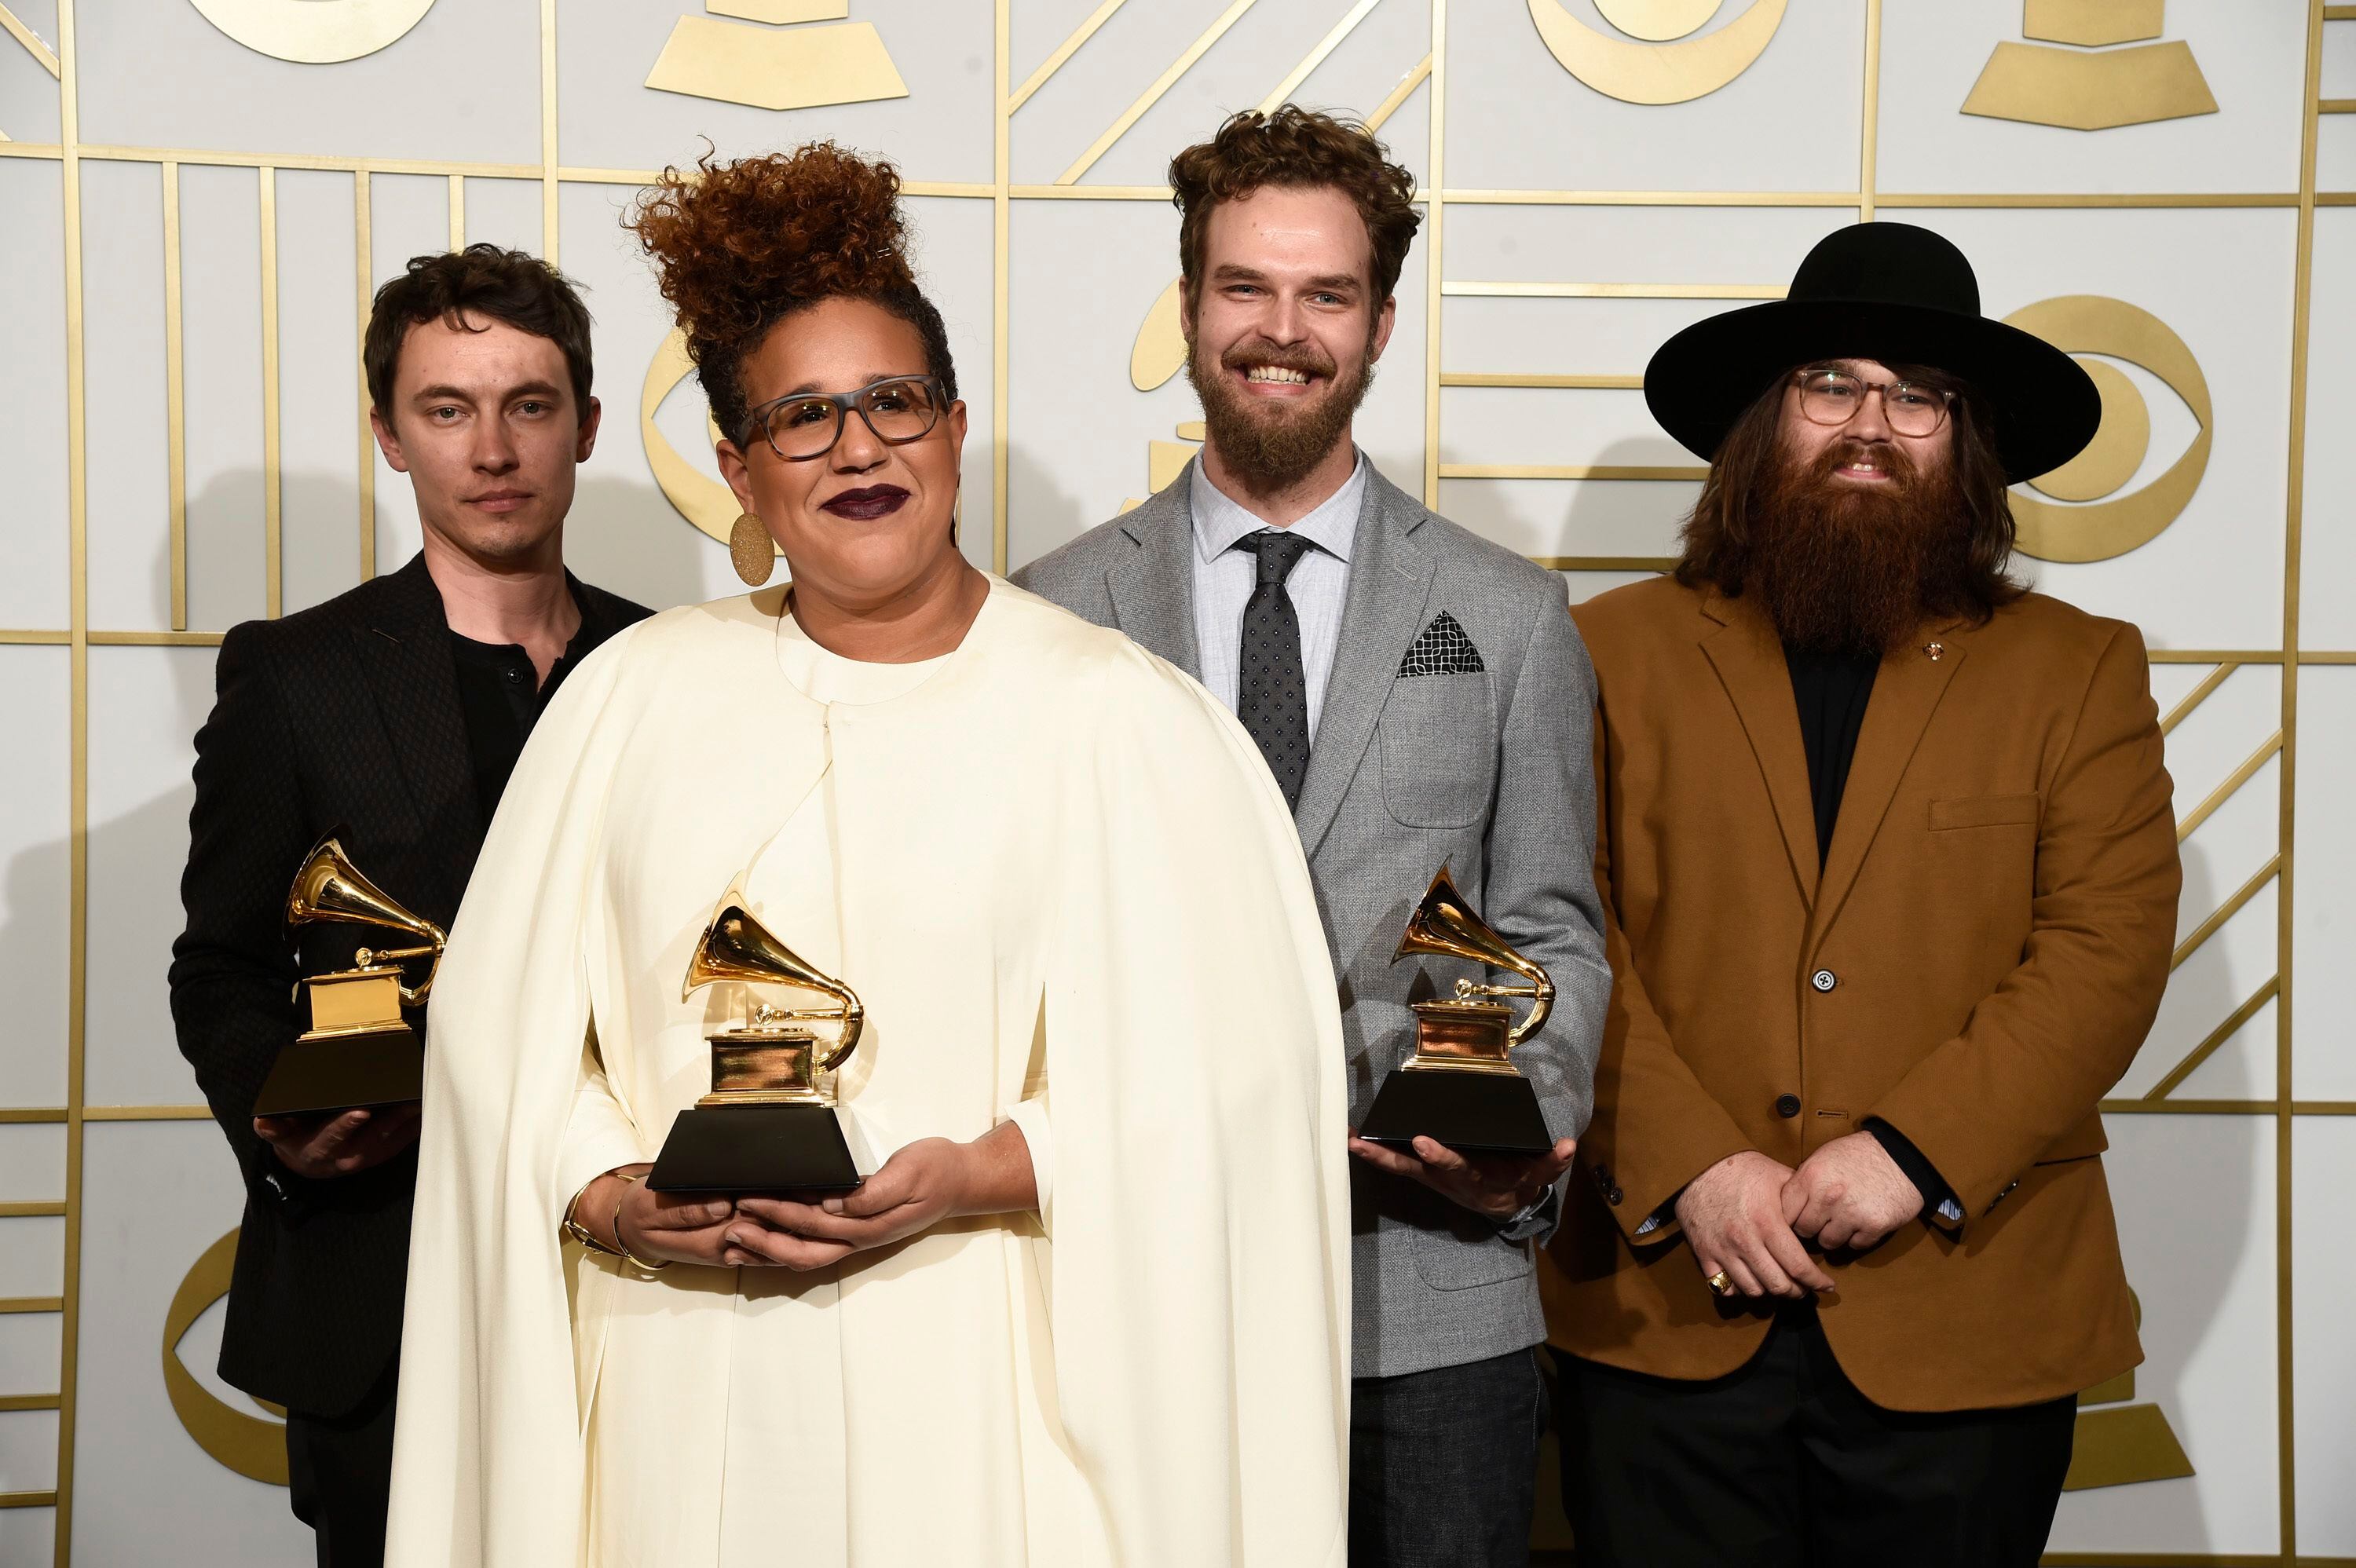 Alabama Shakes drummer says he’s innocent of abuse charge